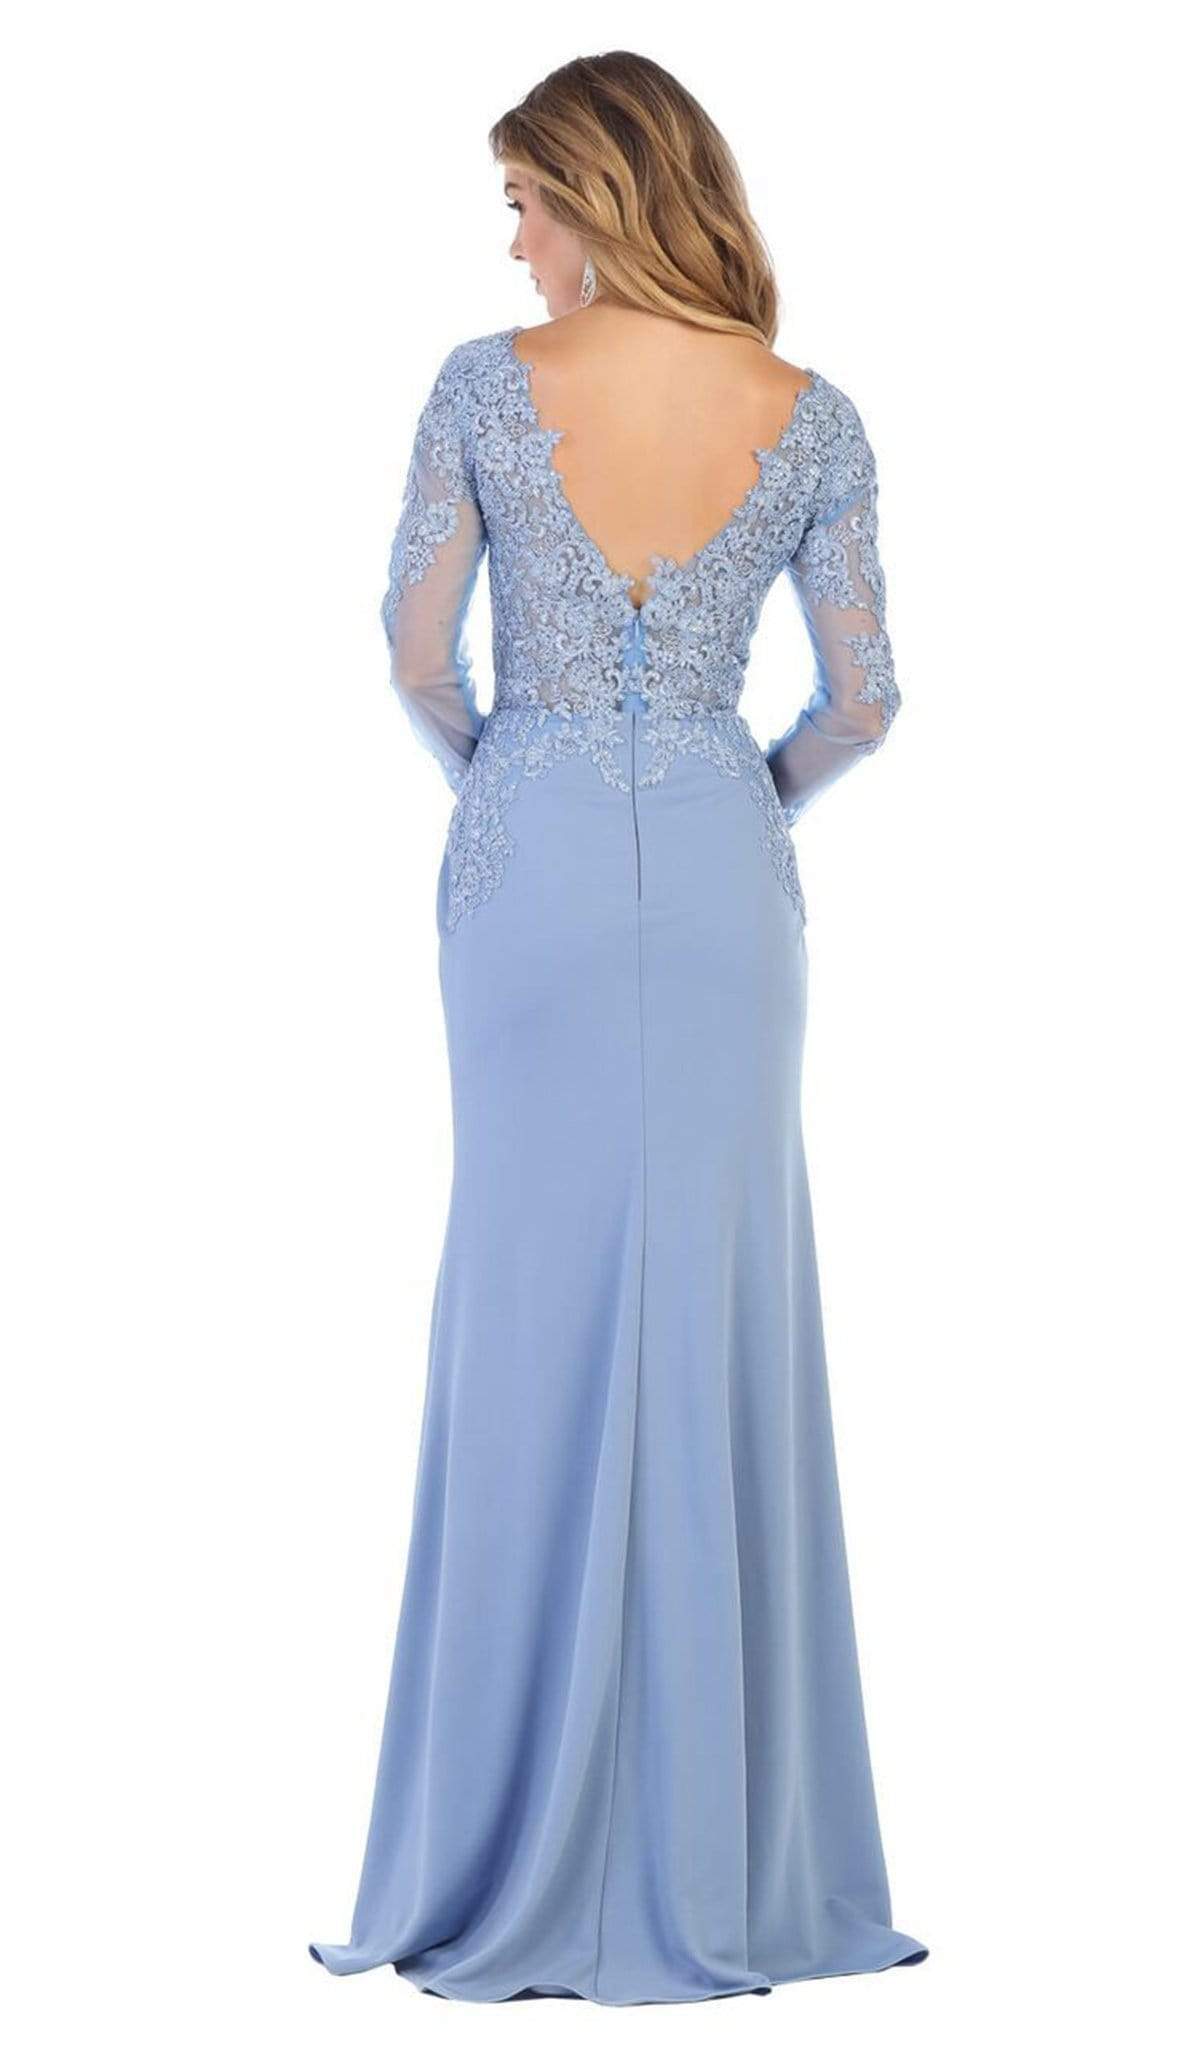 May Queen - MQ1630 Lace Appliqued Plunging V-Neck Gown Bridesmaid Dresses